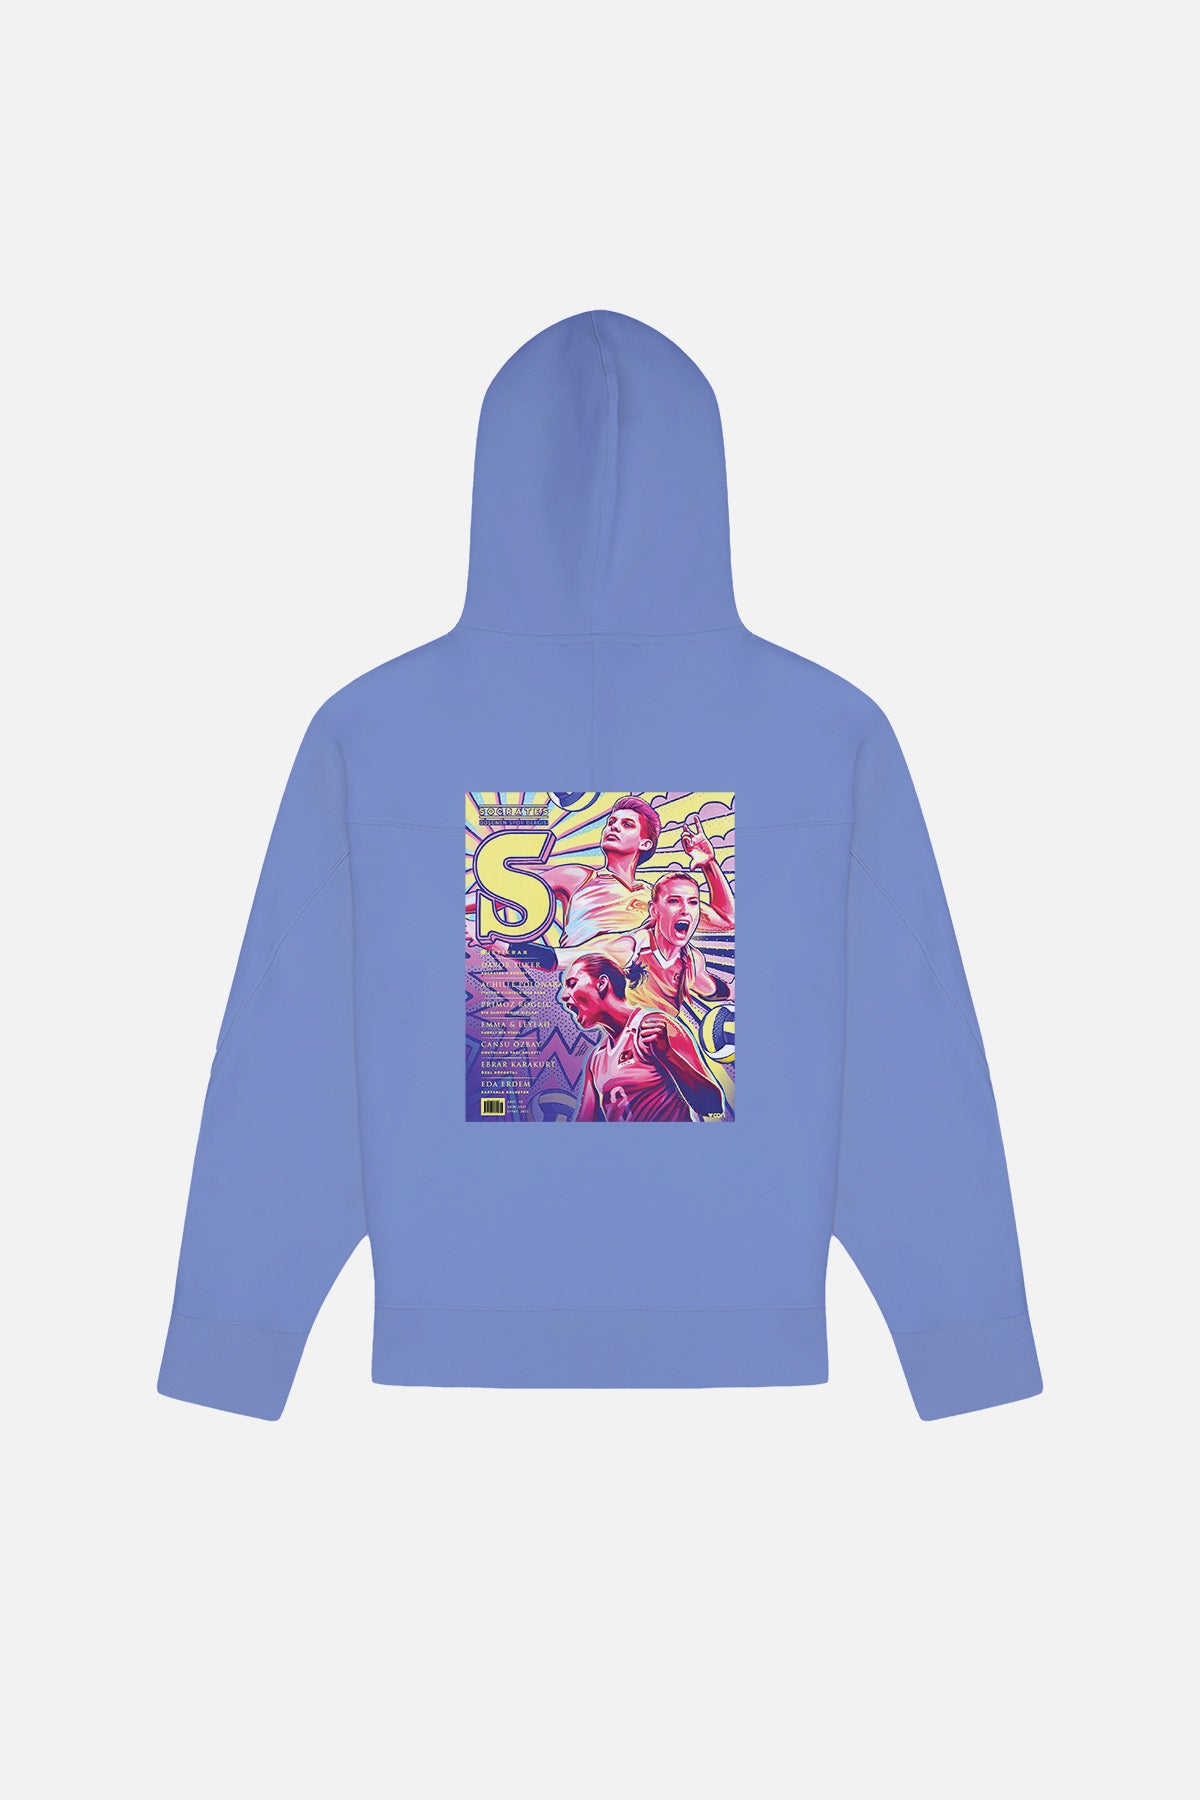 Issue #79 Hoodie - Lila